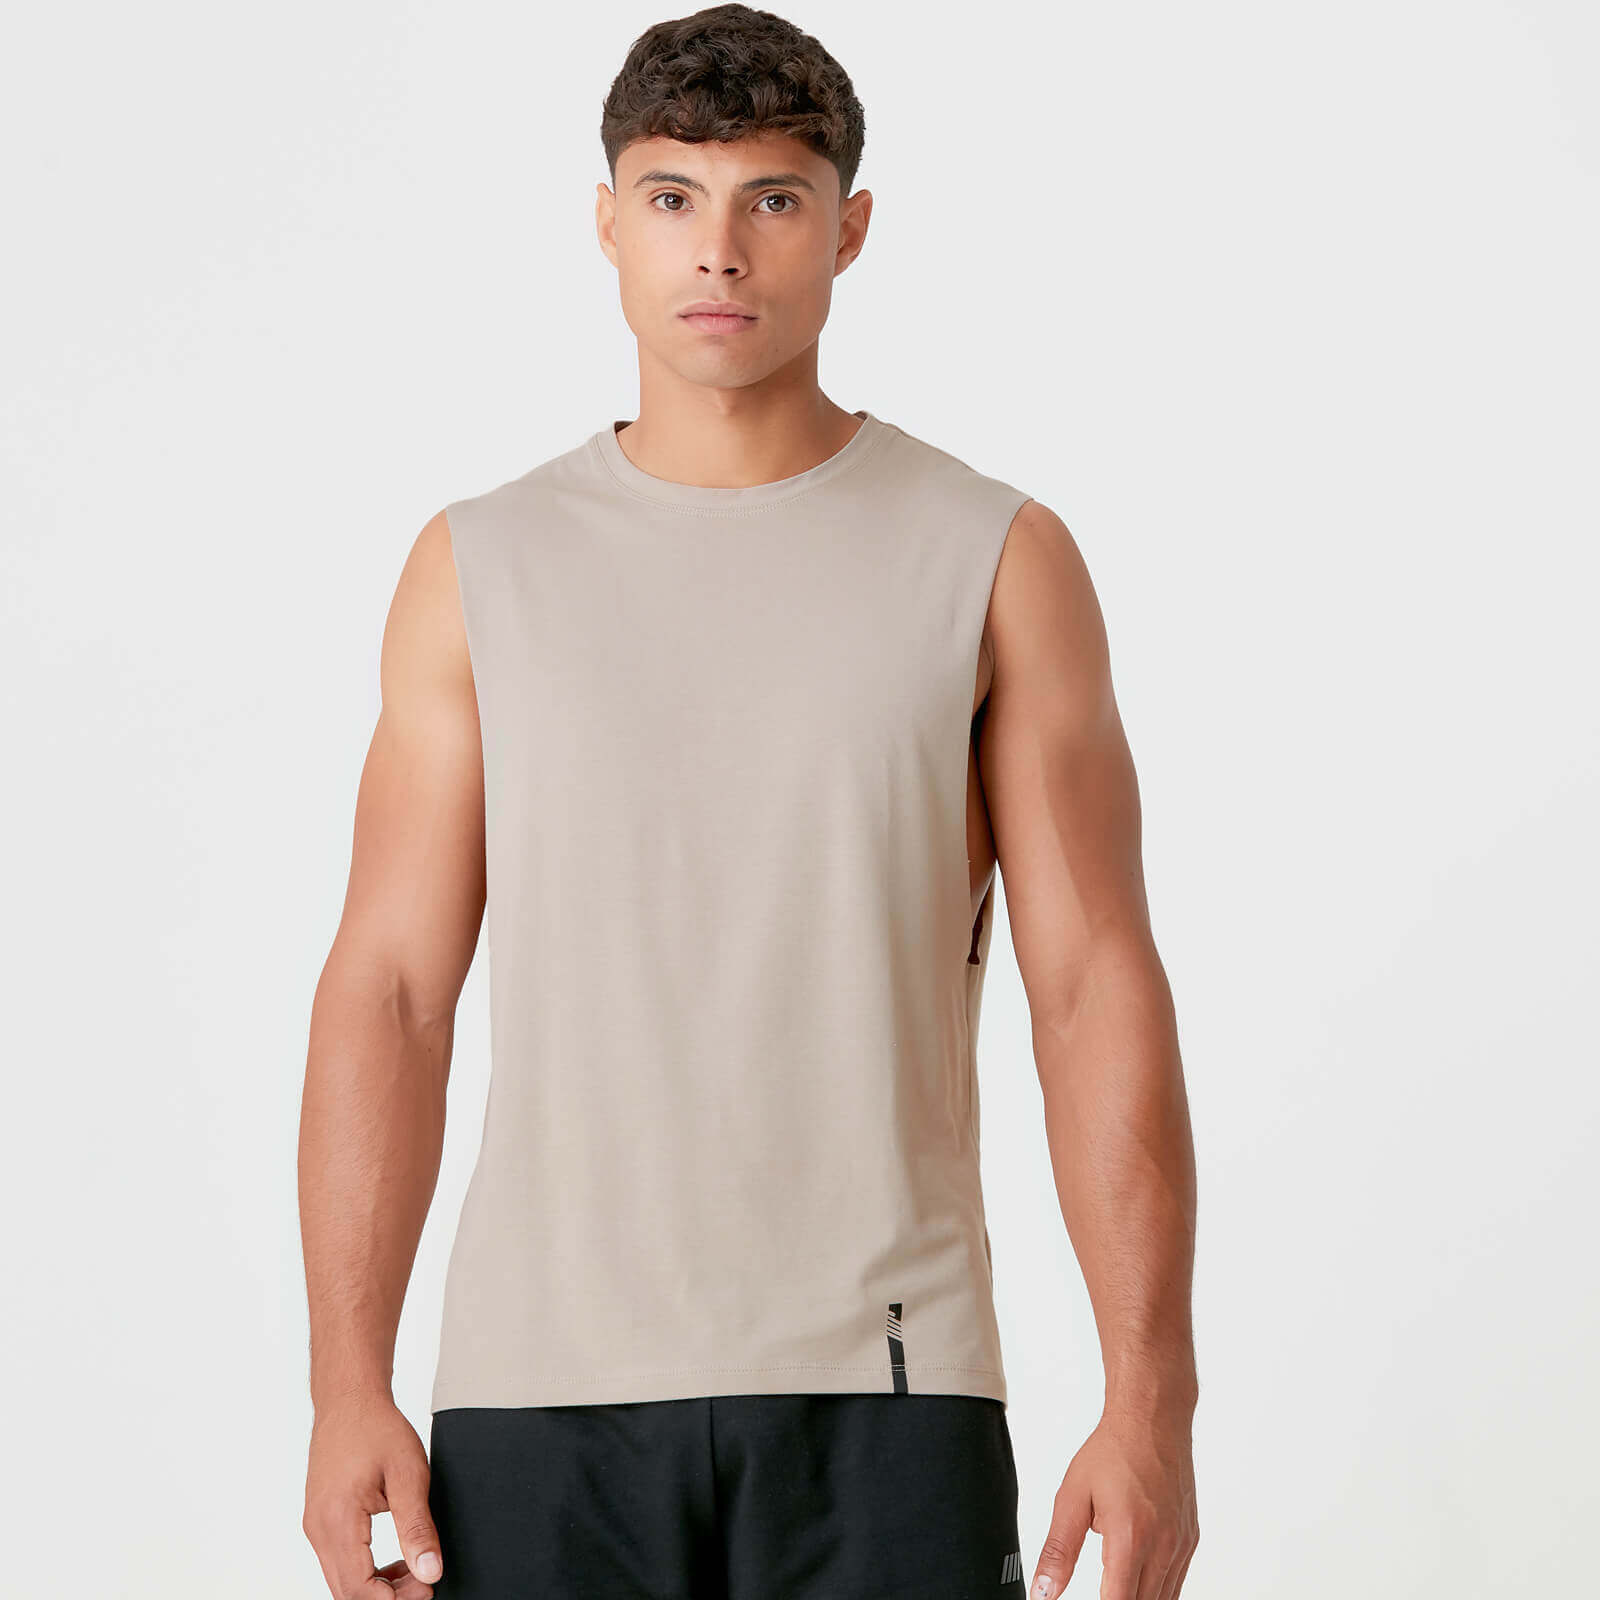 MP Men's Luxe Classic Drop Armhole Tank Top - Taupe